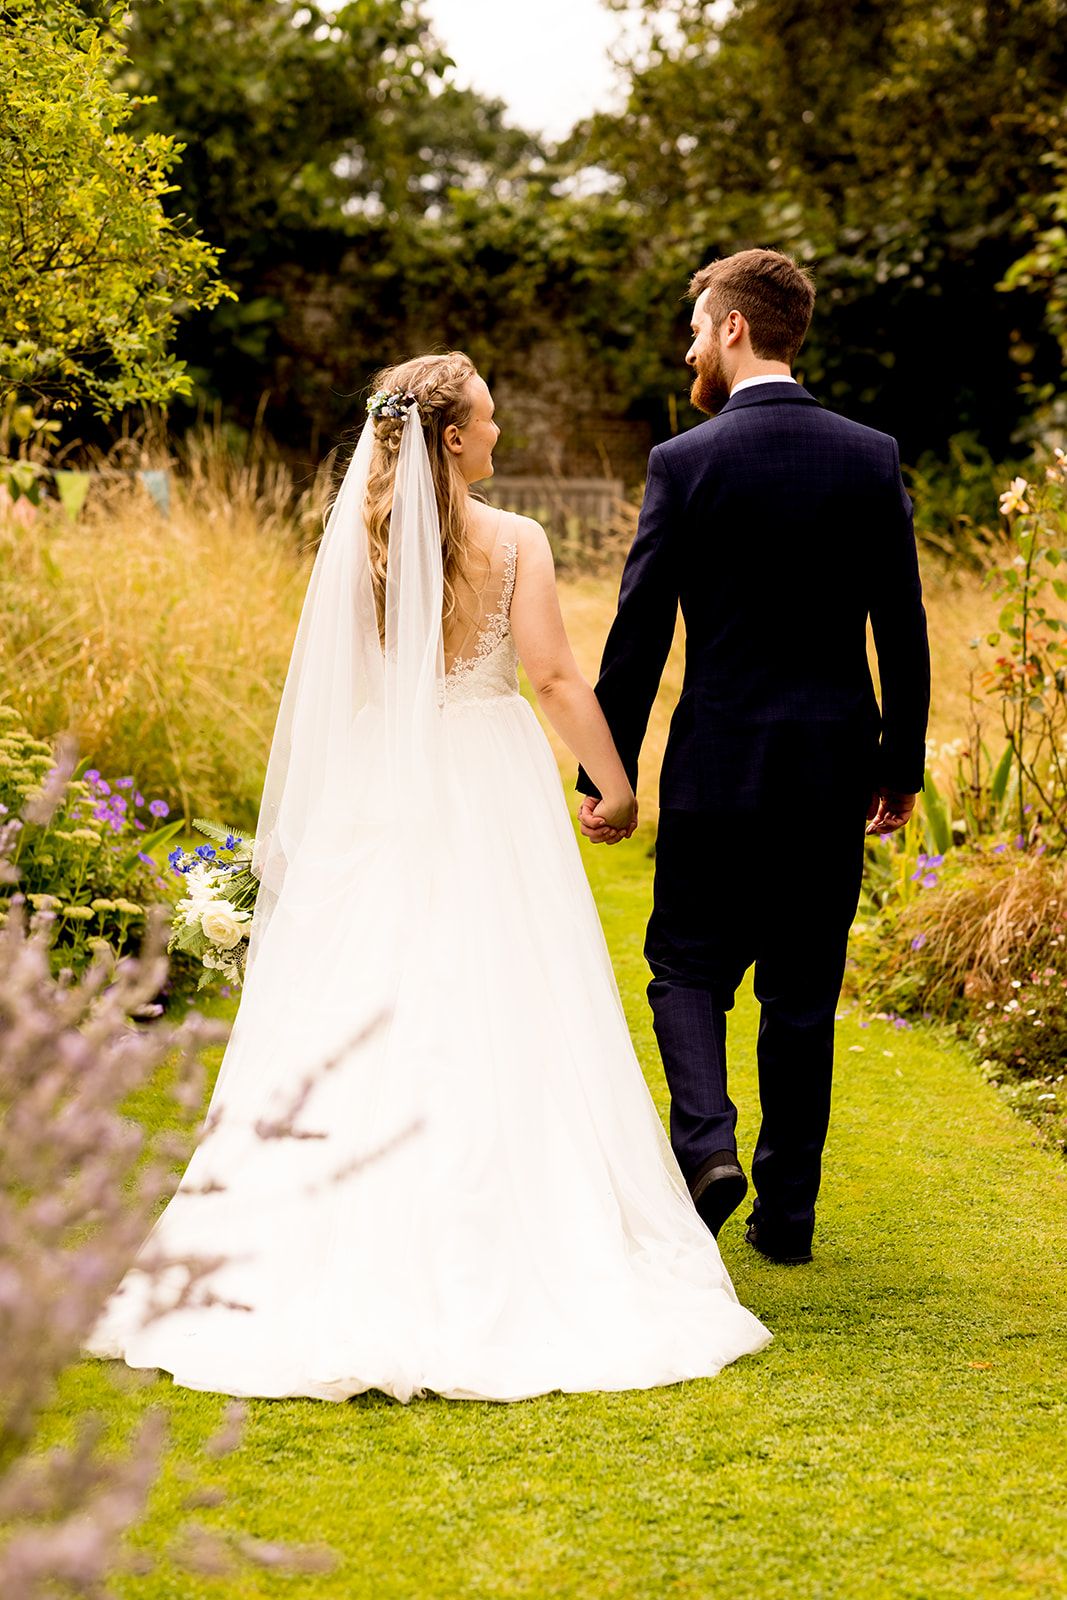 Photographs after the ceremony in the Walled Garden